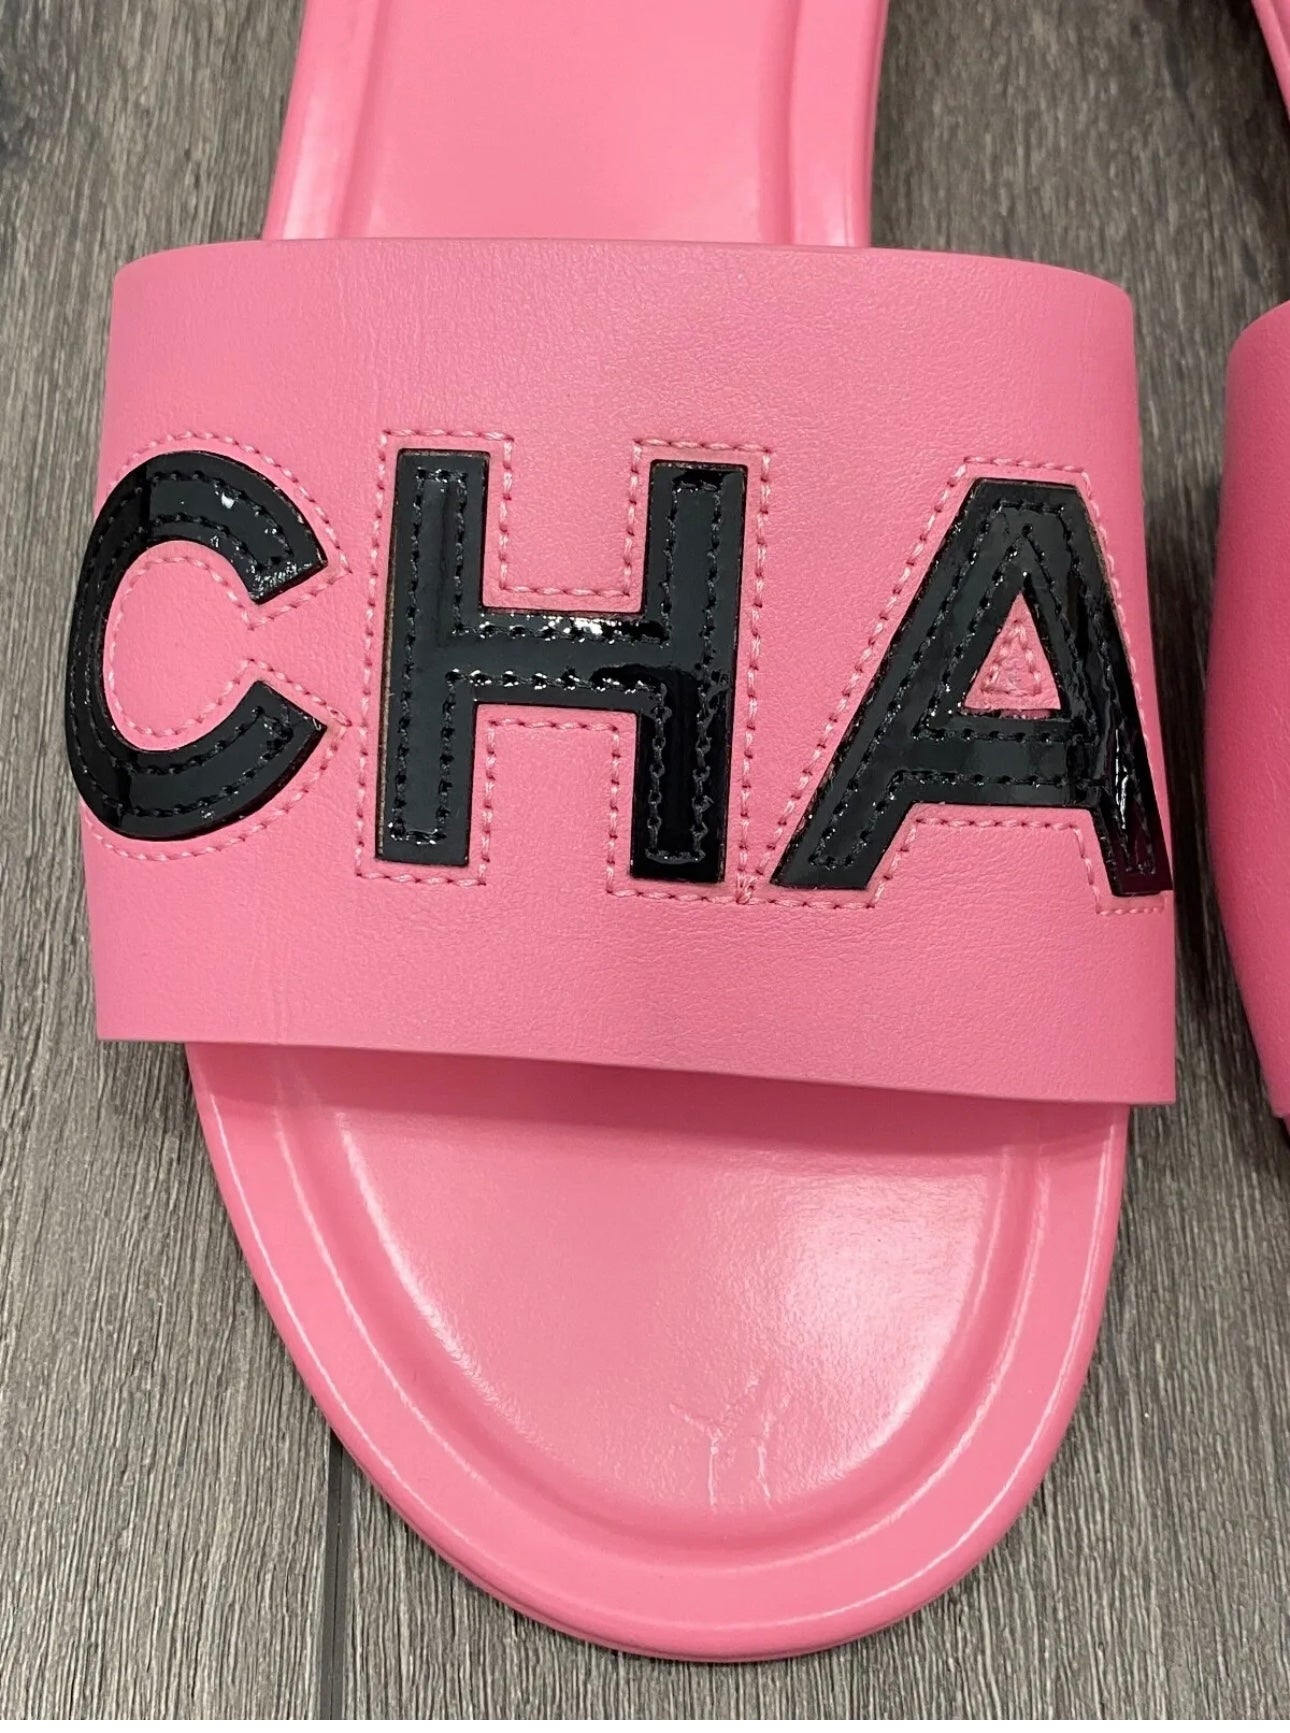 CHANEL CHA NEL LOGO PINK LEATHER FLAT SHOES SLIDES MULES